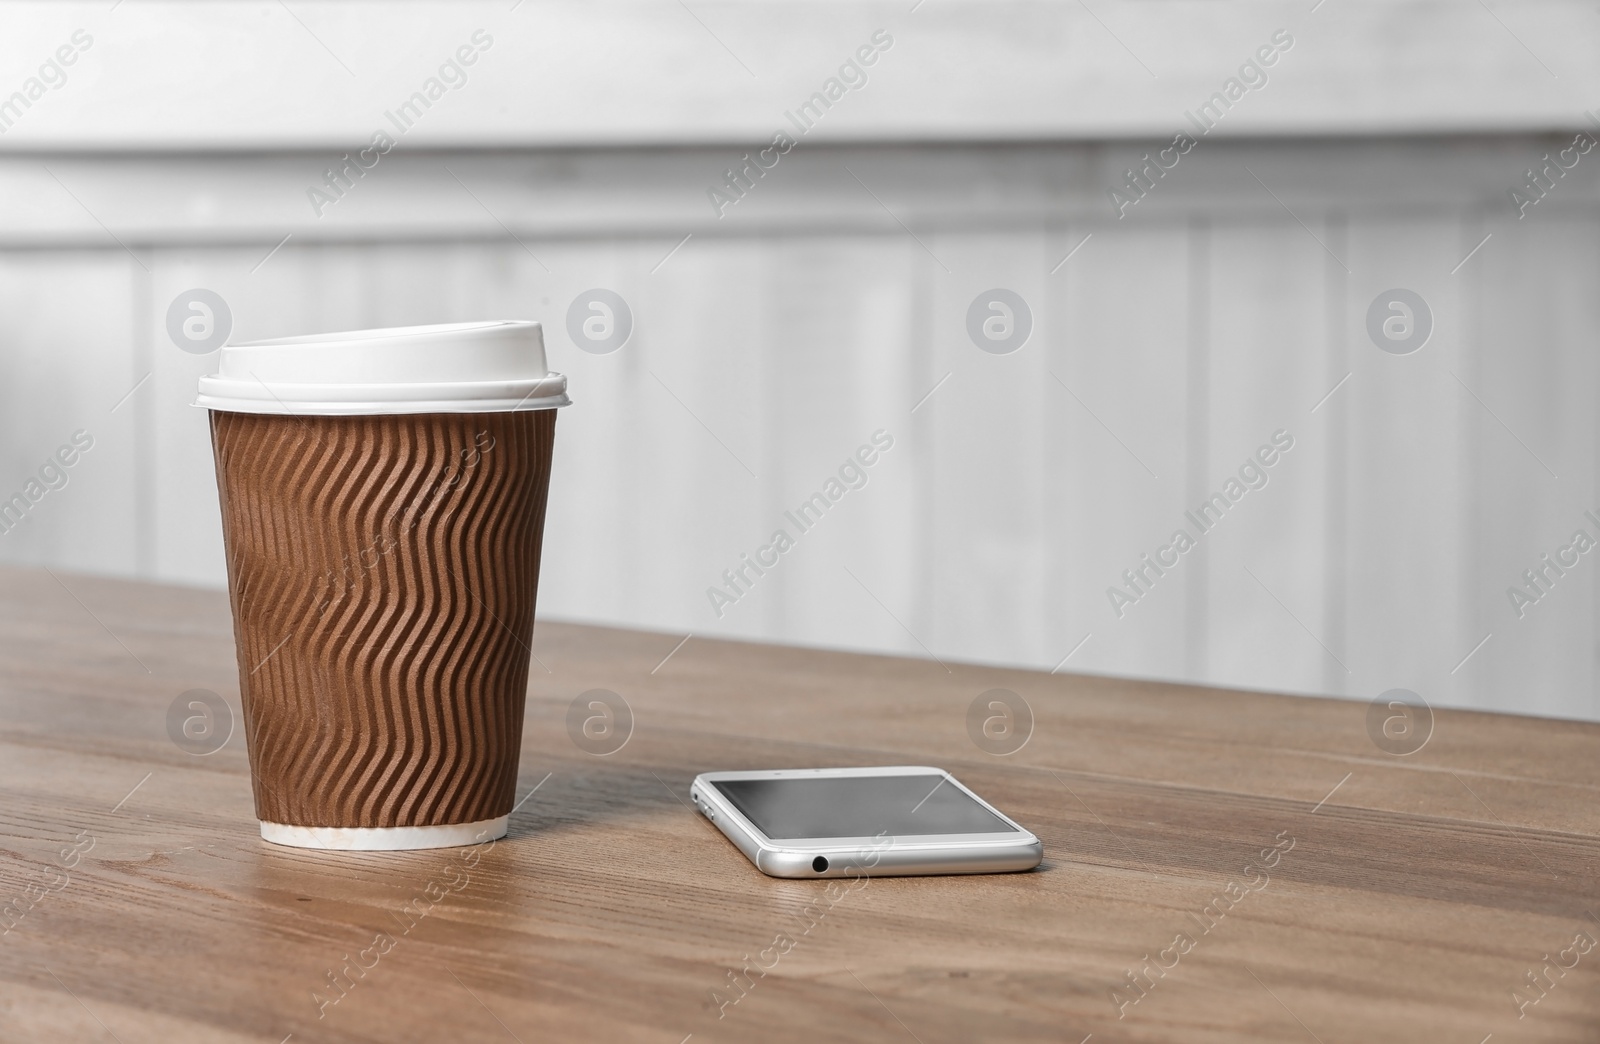 Photo of Cardboard coffee cup with lid and phone on wooden table. Space for text